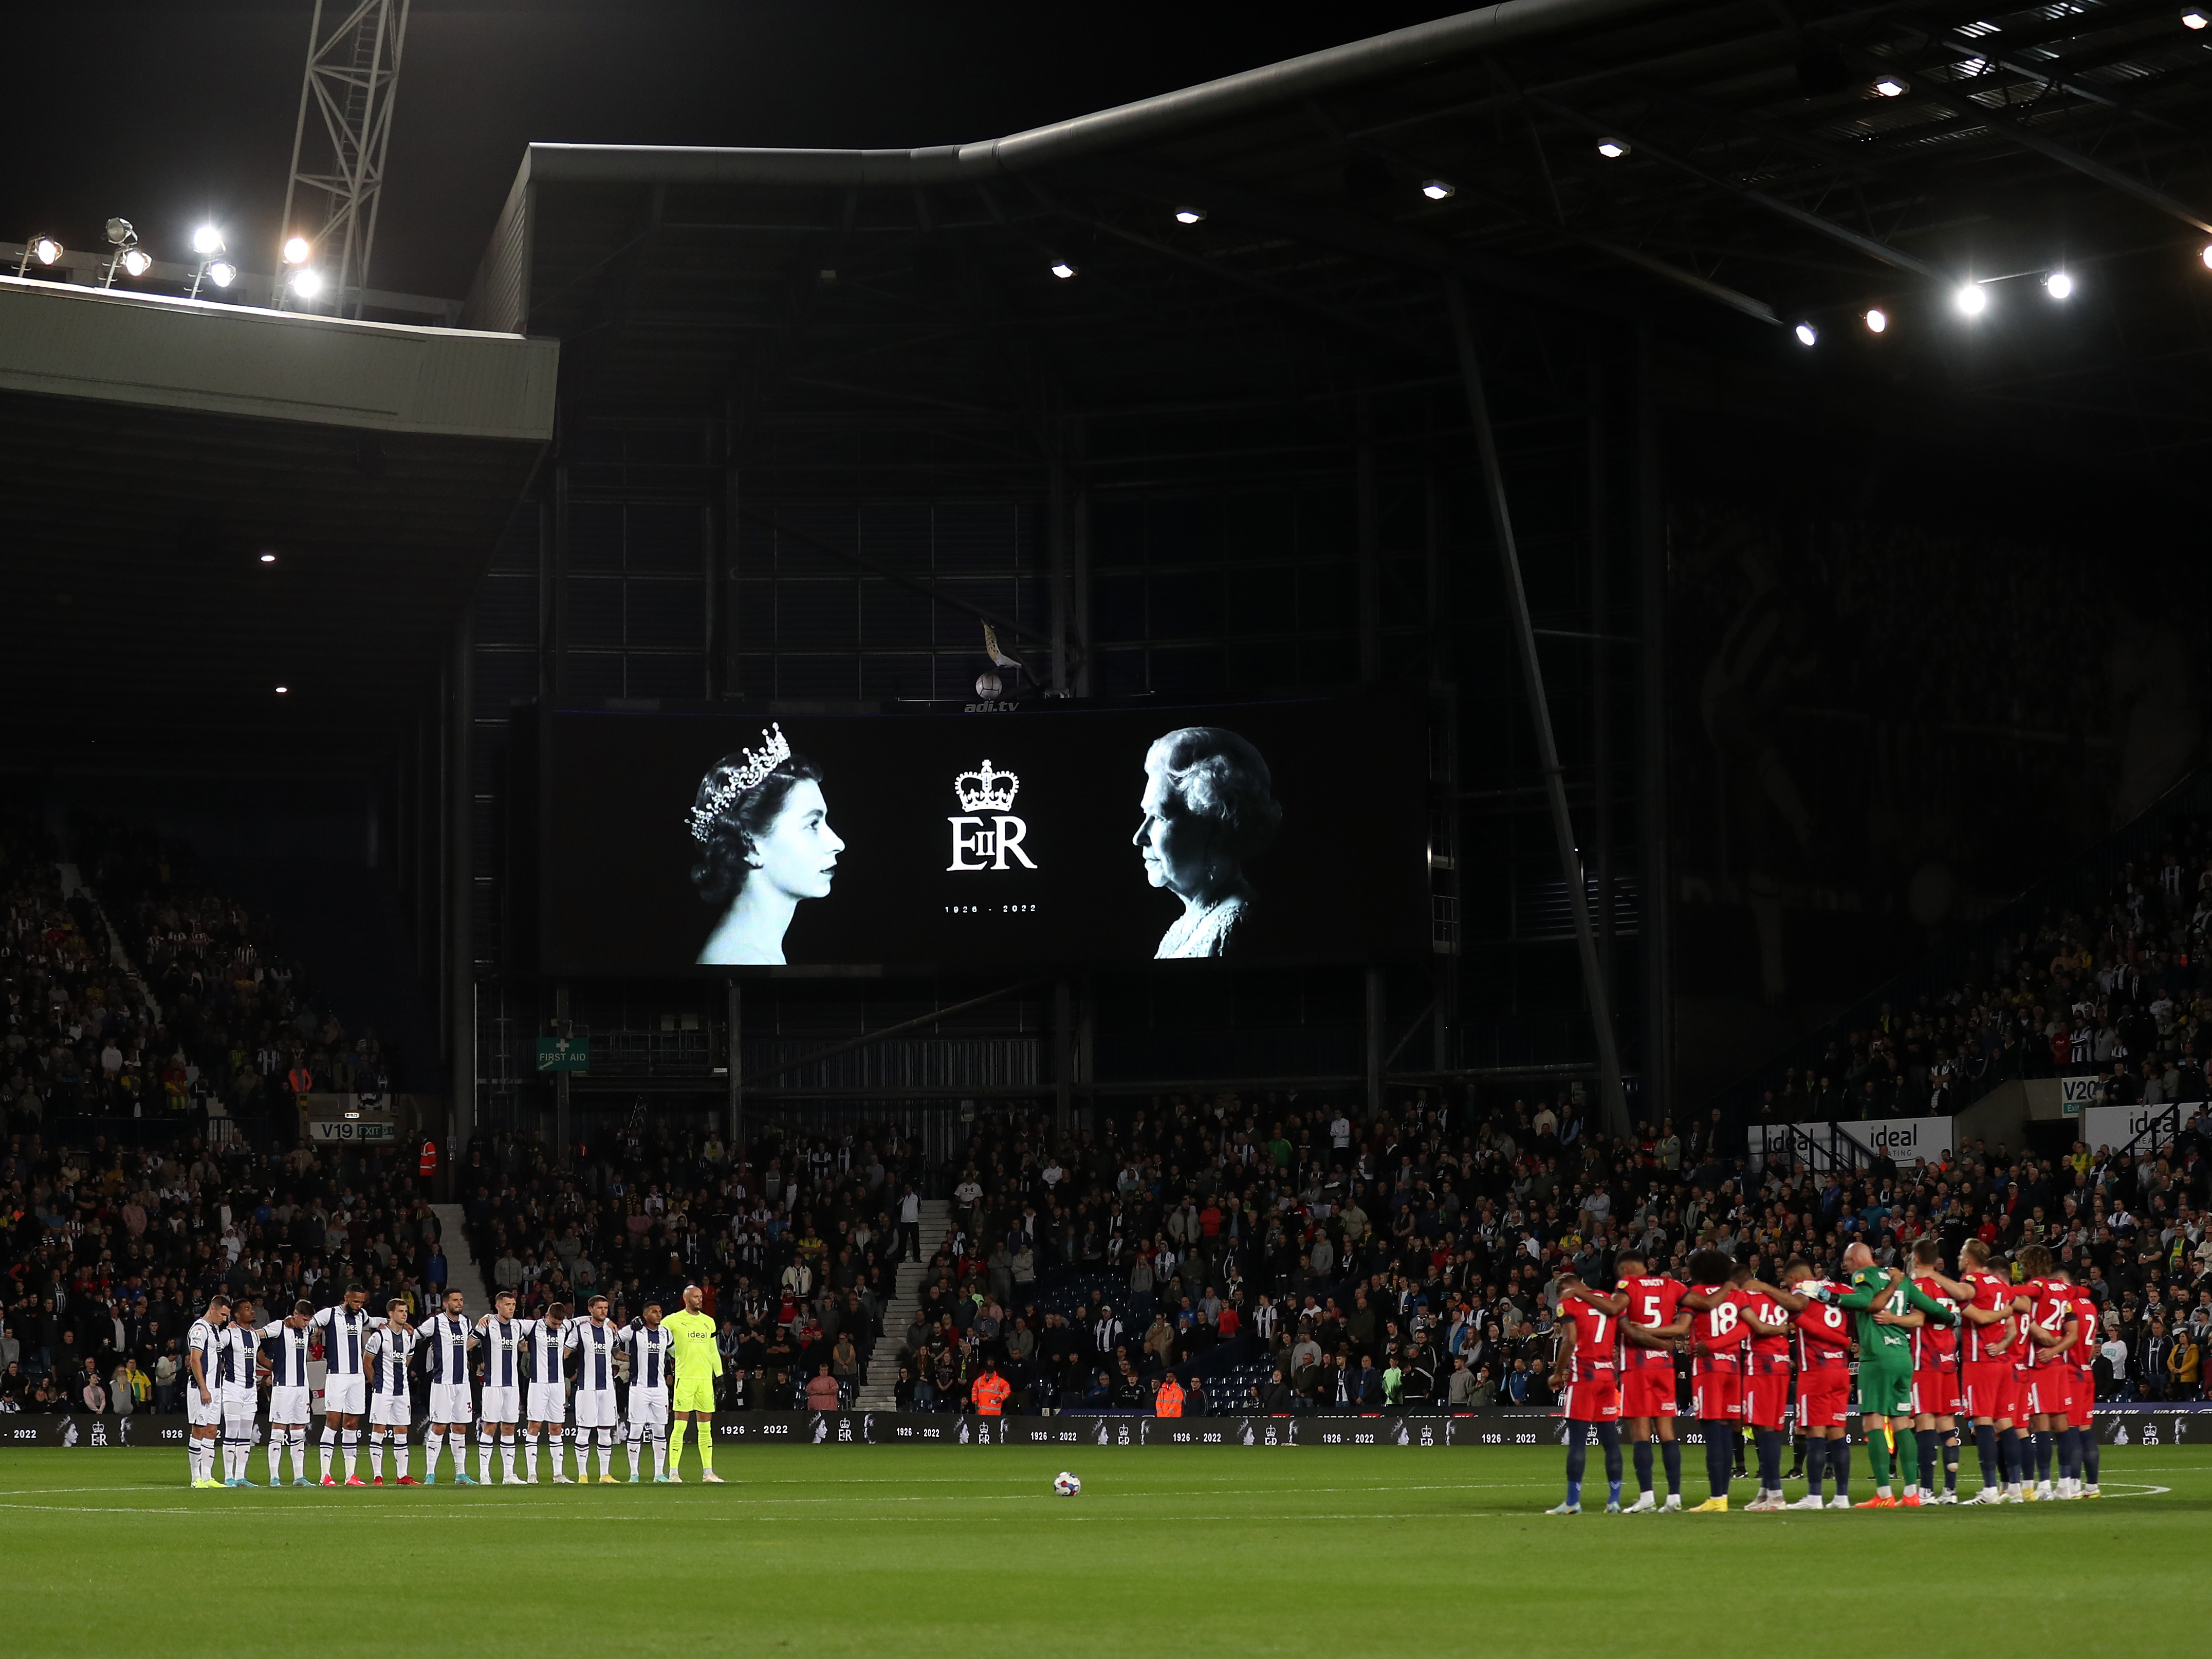 Albion and Blues pay their respects to Her late Majesty, Queen Elizabeth II